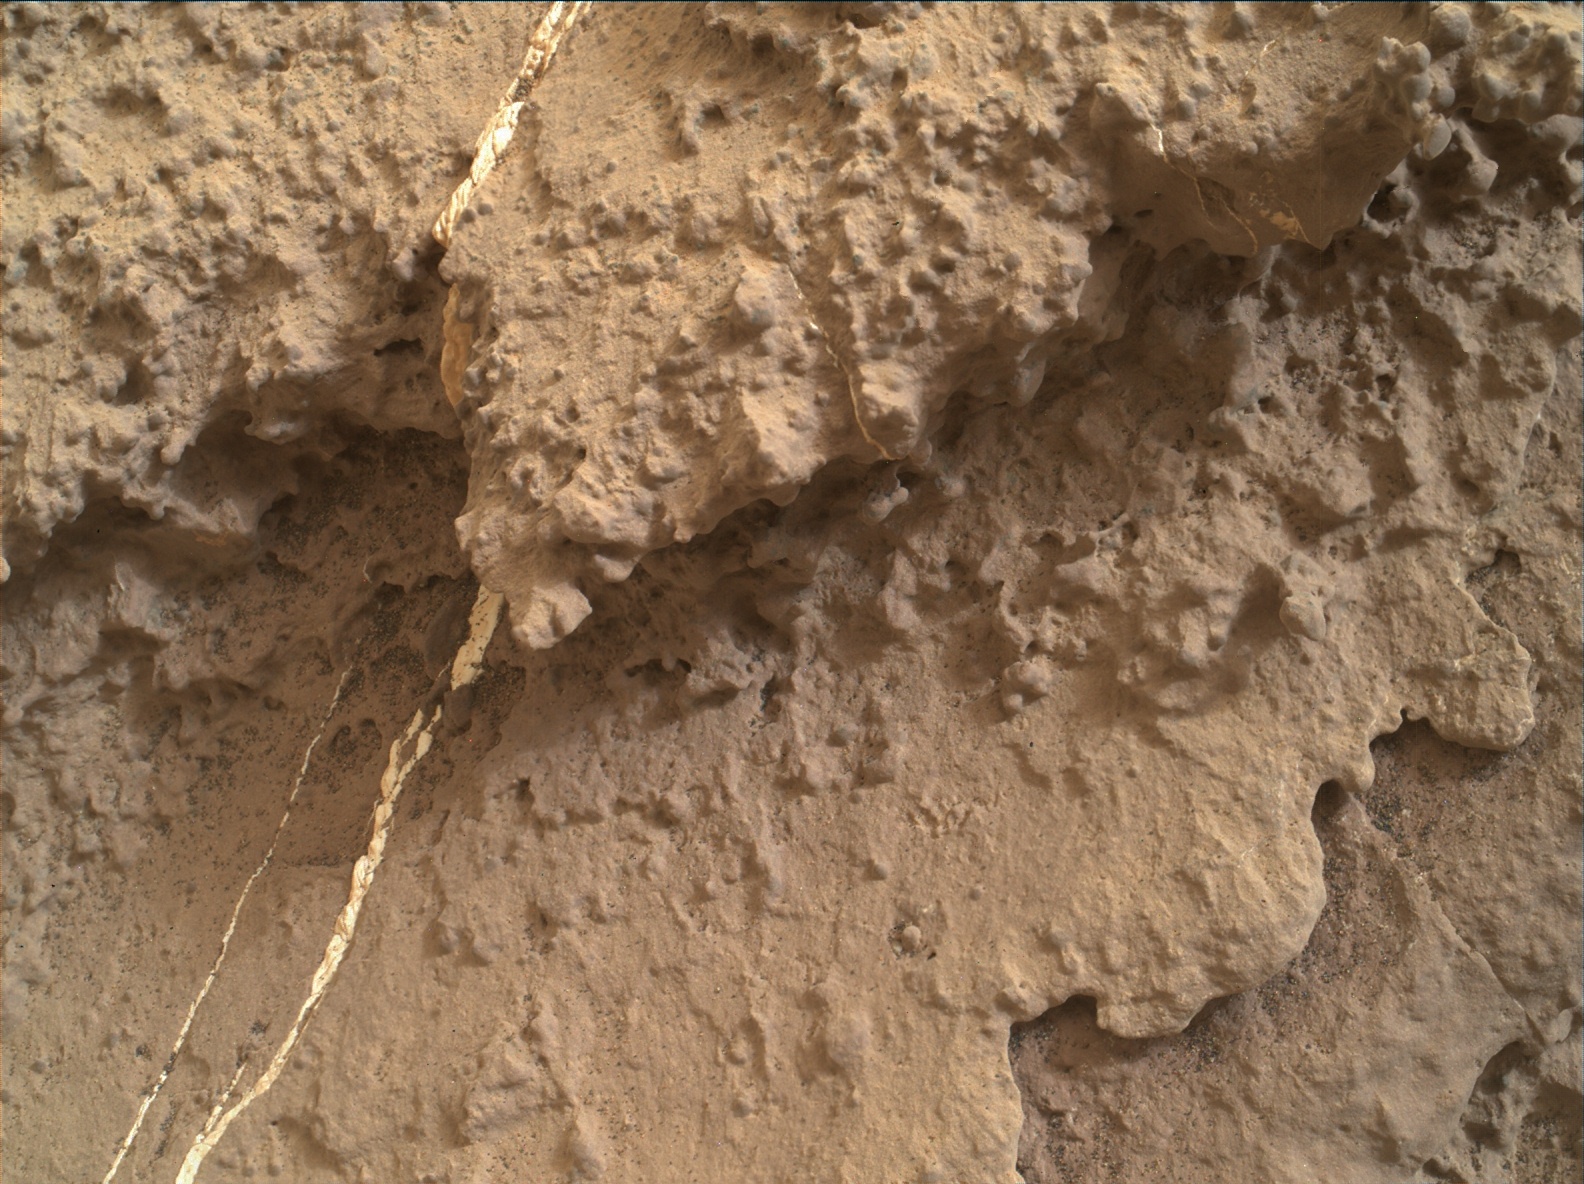 Nasa's Mars rover Curiosity acquired this image using its Mars Hand Lens Imager (MAHLI) on Sol 1474